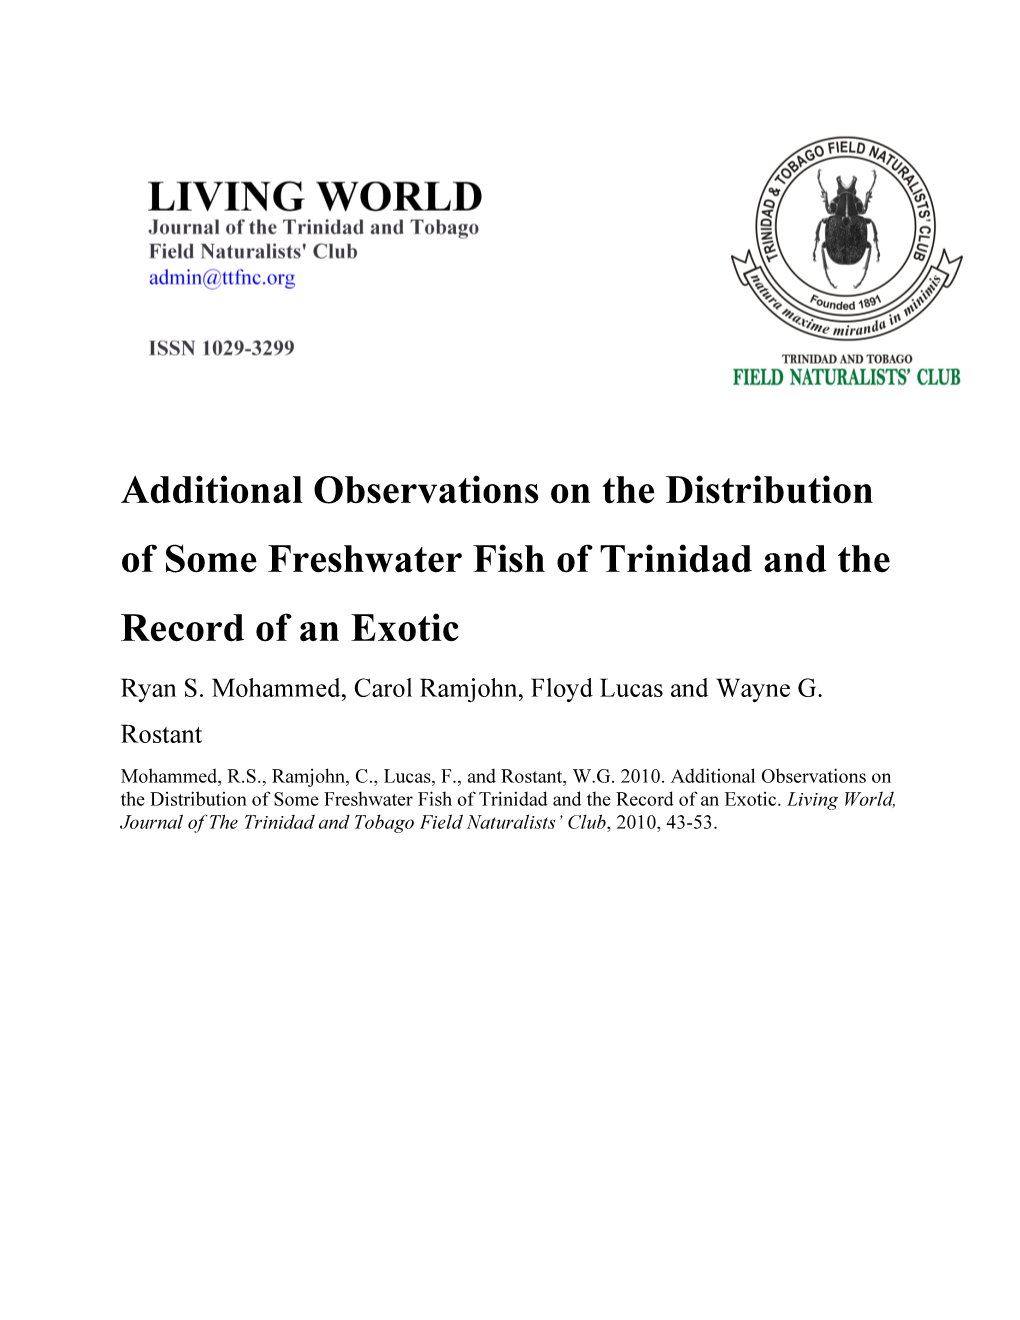 Additional Observations on the Distribution of Some Freshwater Fish of Trinidad and the Record of an Exotic